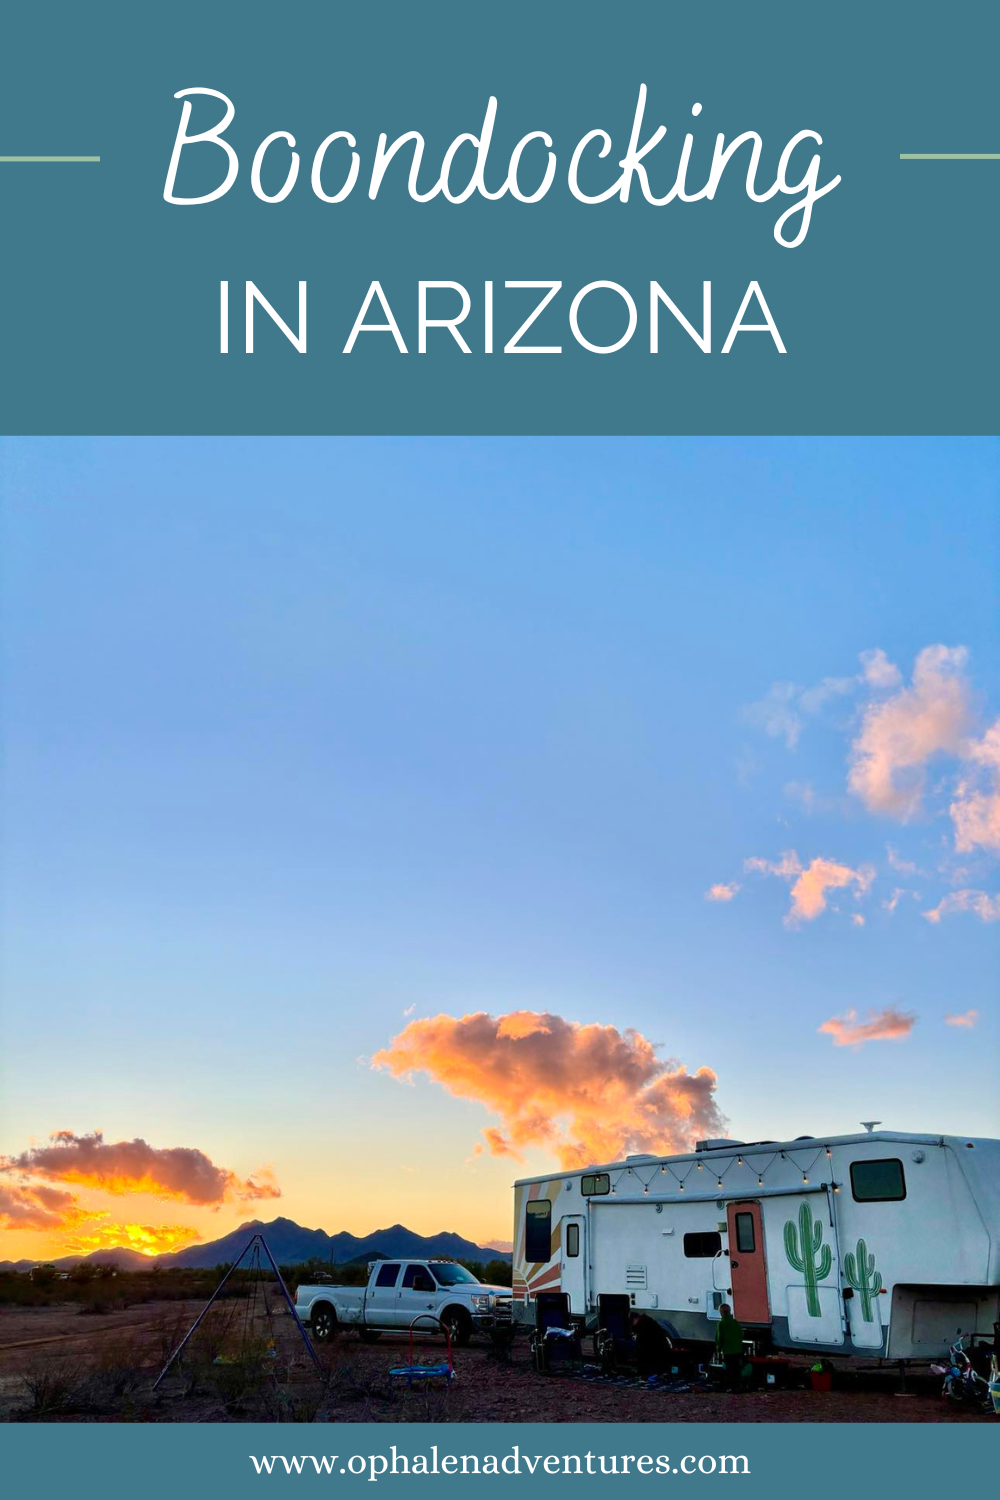 Boondocking in Arizona, fifth wheel parked outside of Tucson | O'Phalen Adventures